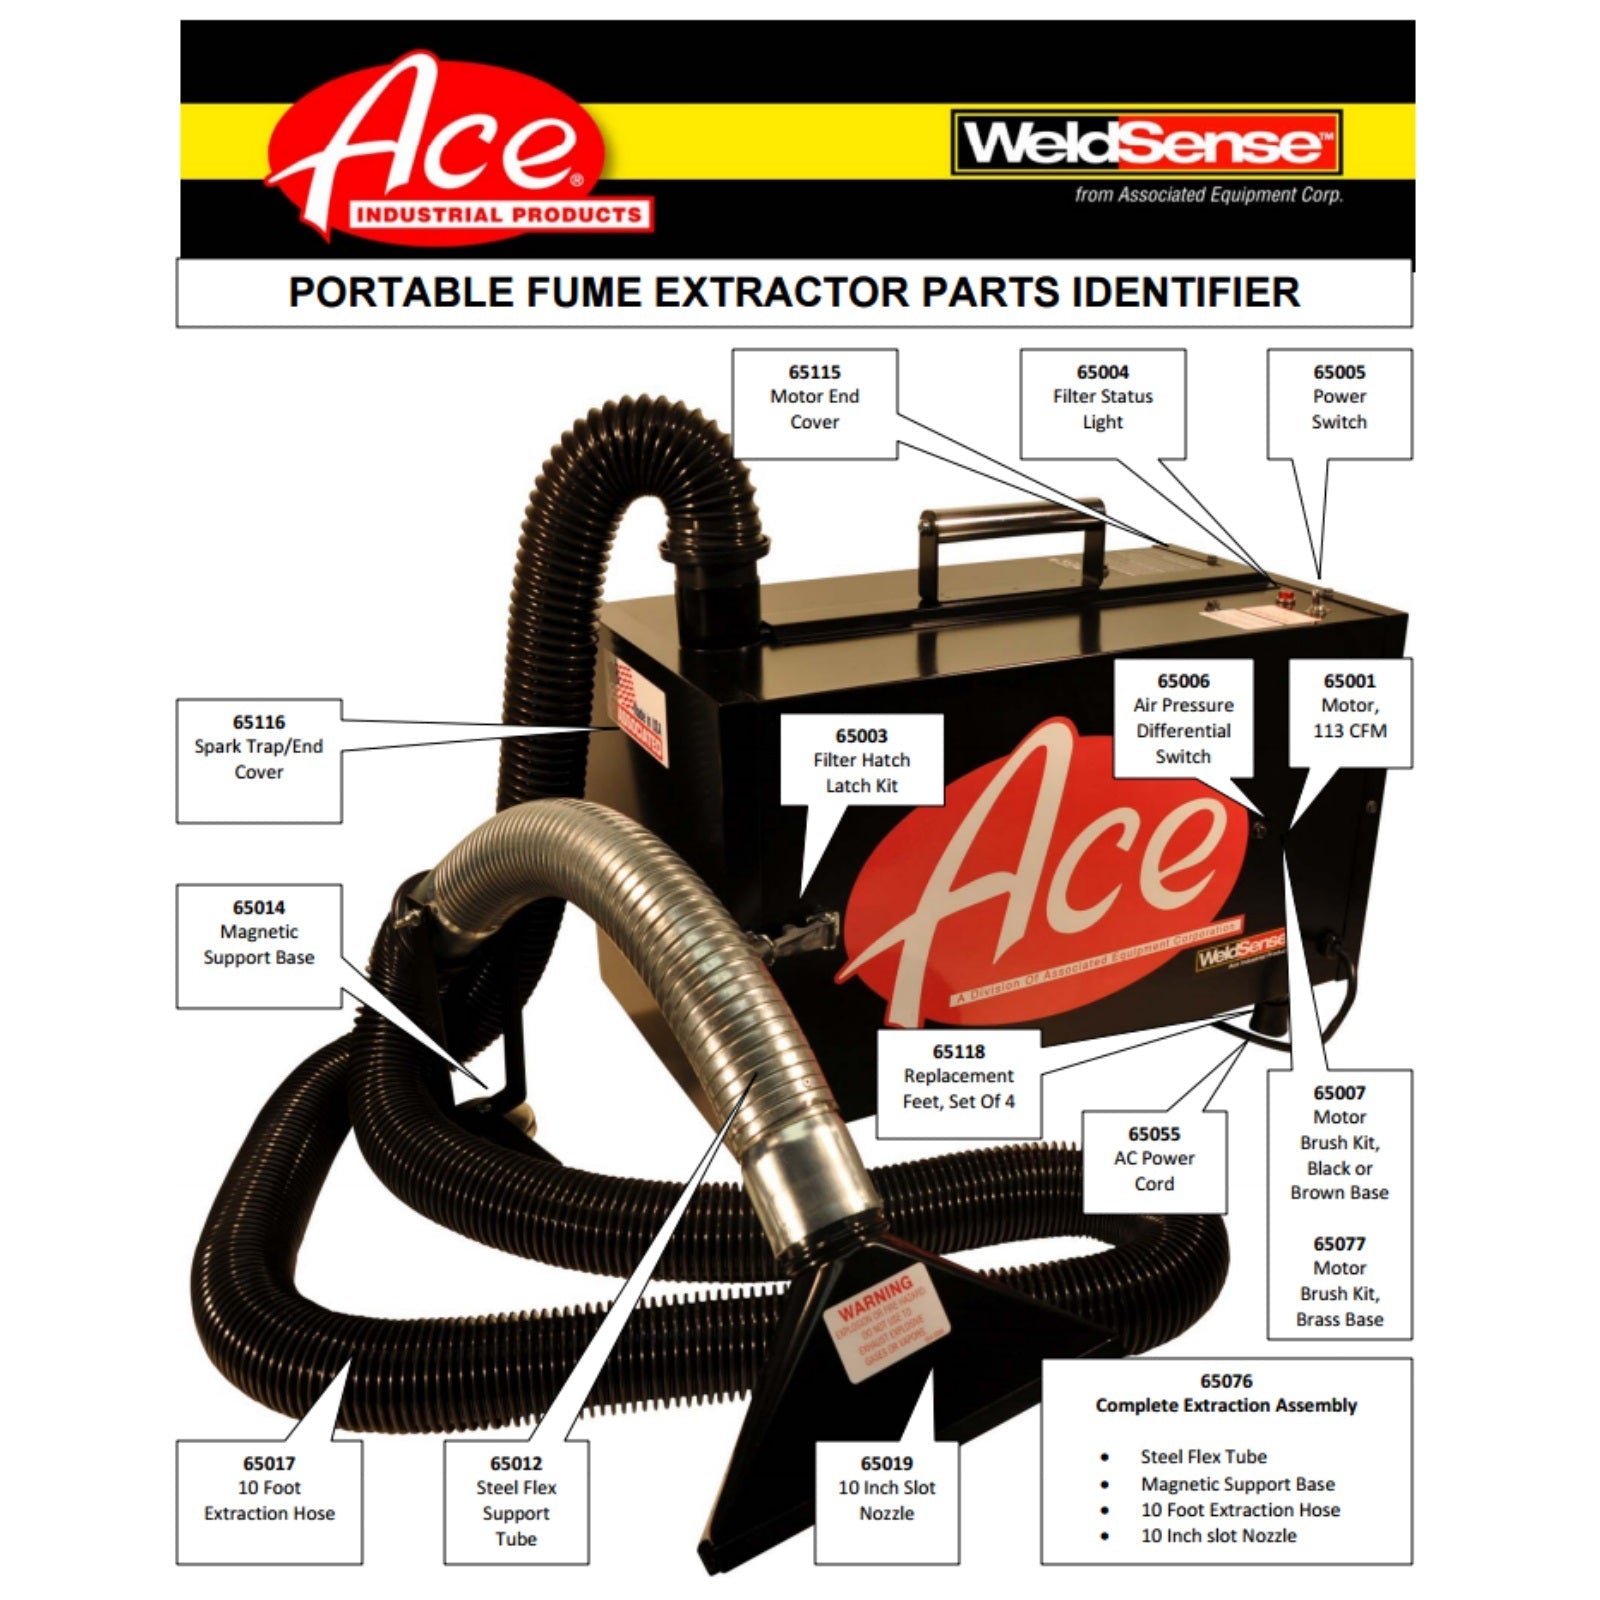 Ace 120V Portable Fume Extractor (73-201-95)